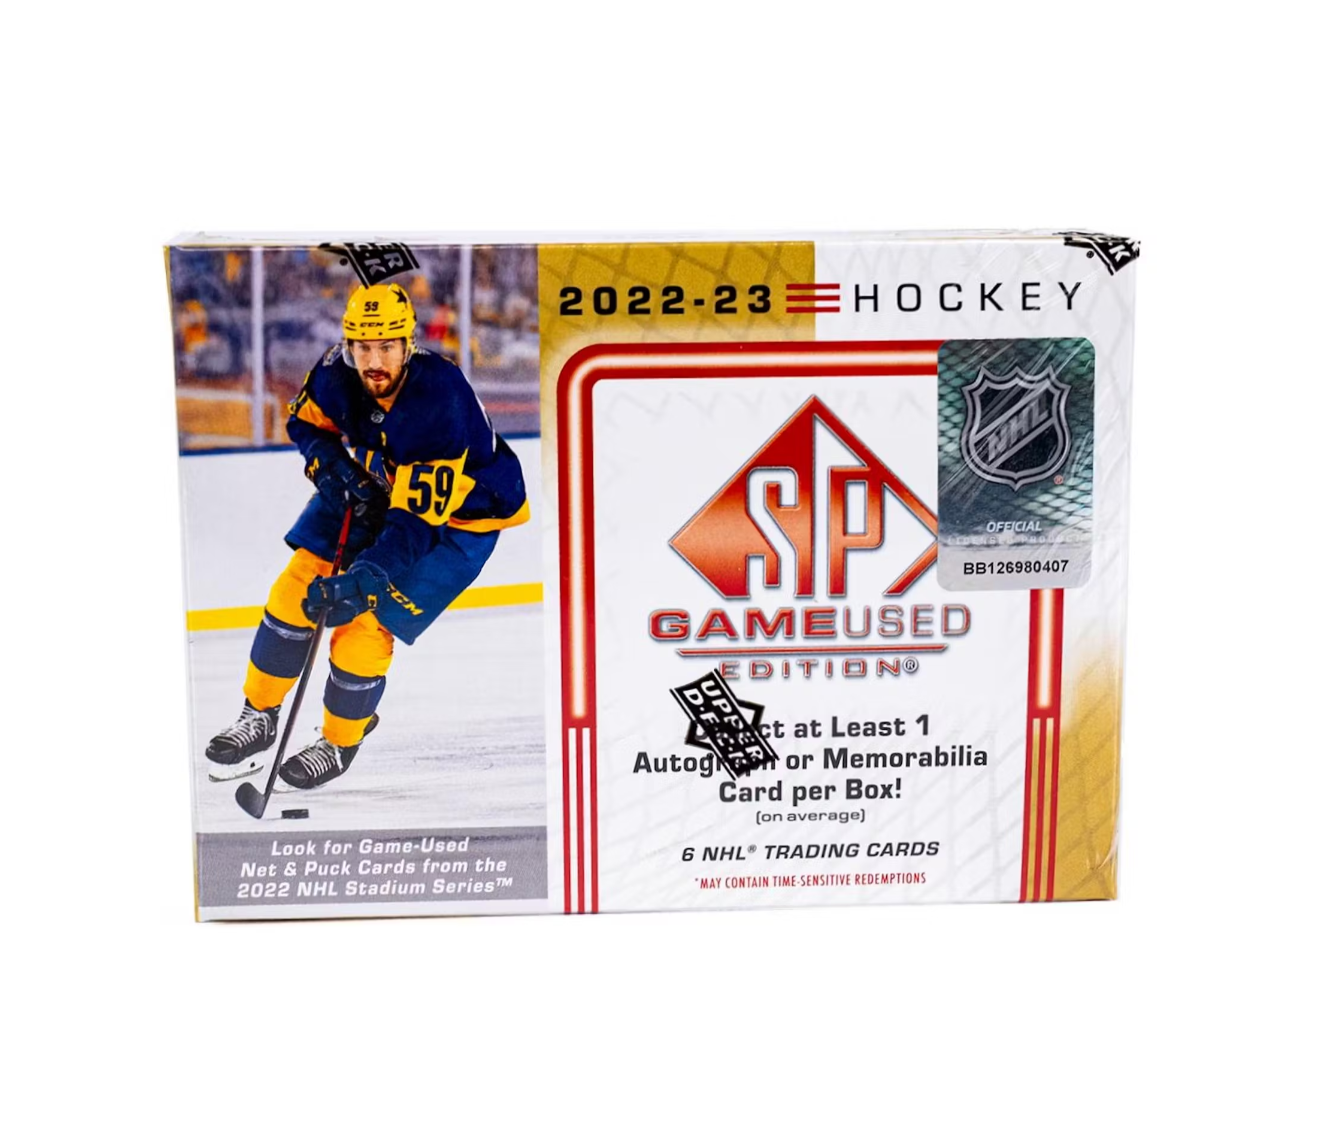 2022/23 Upper Deck SP Game Used Hockey 18 Box Case